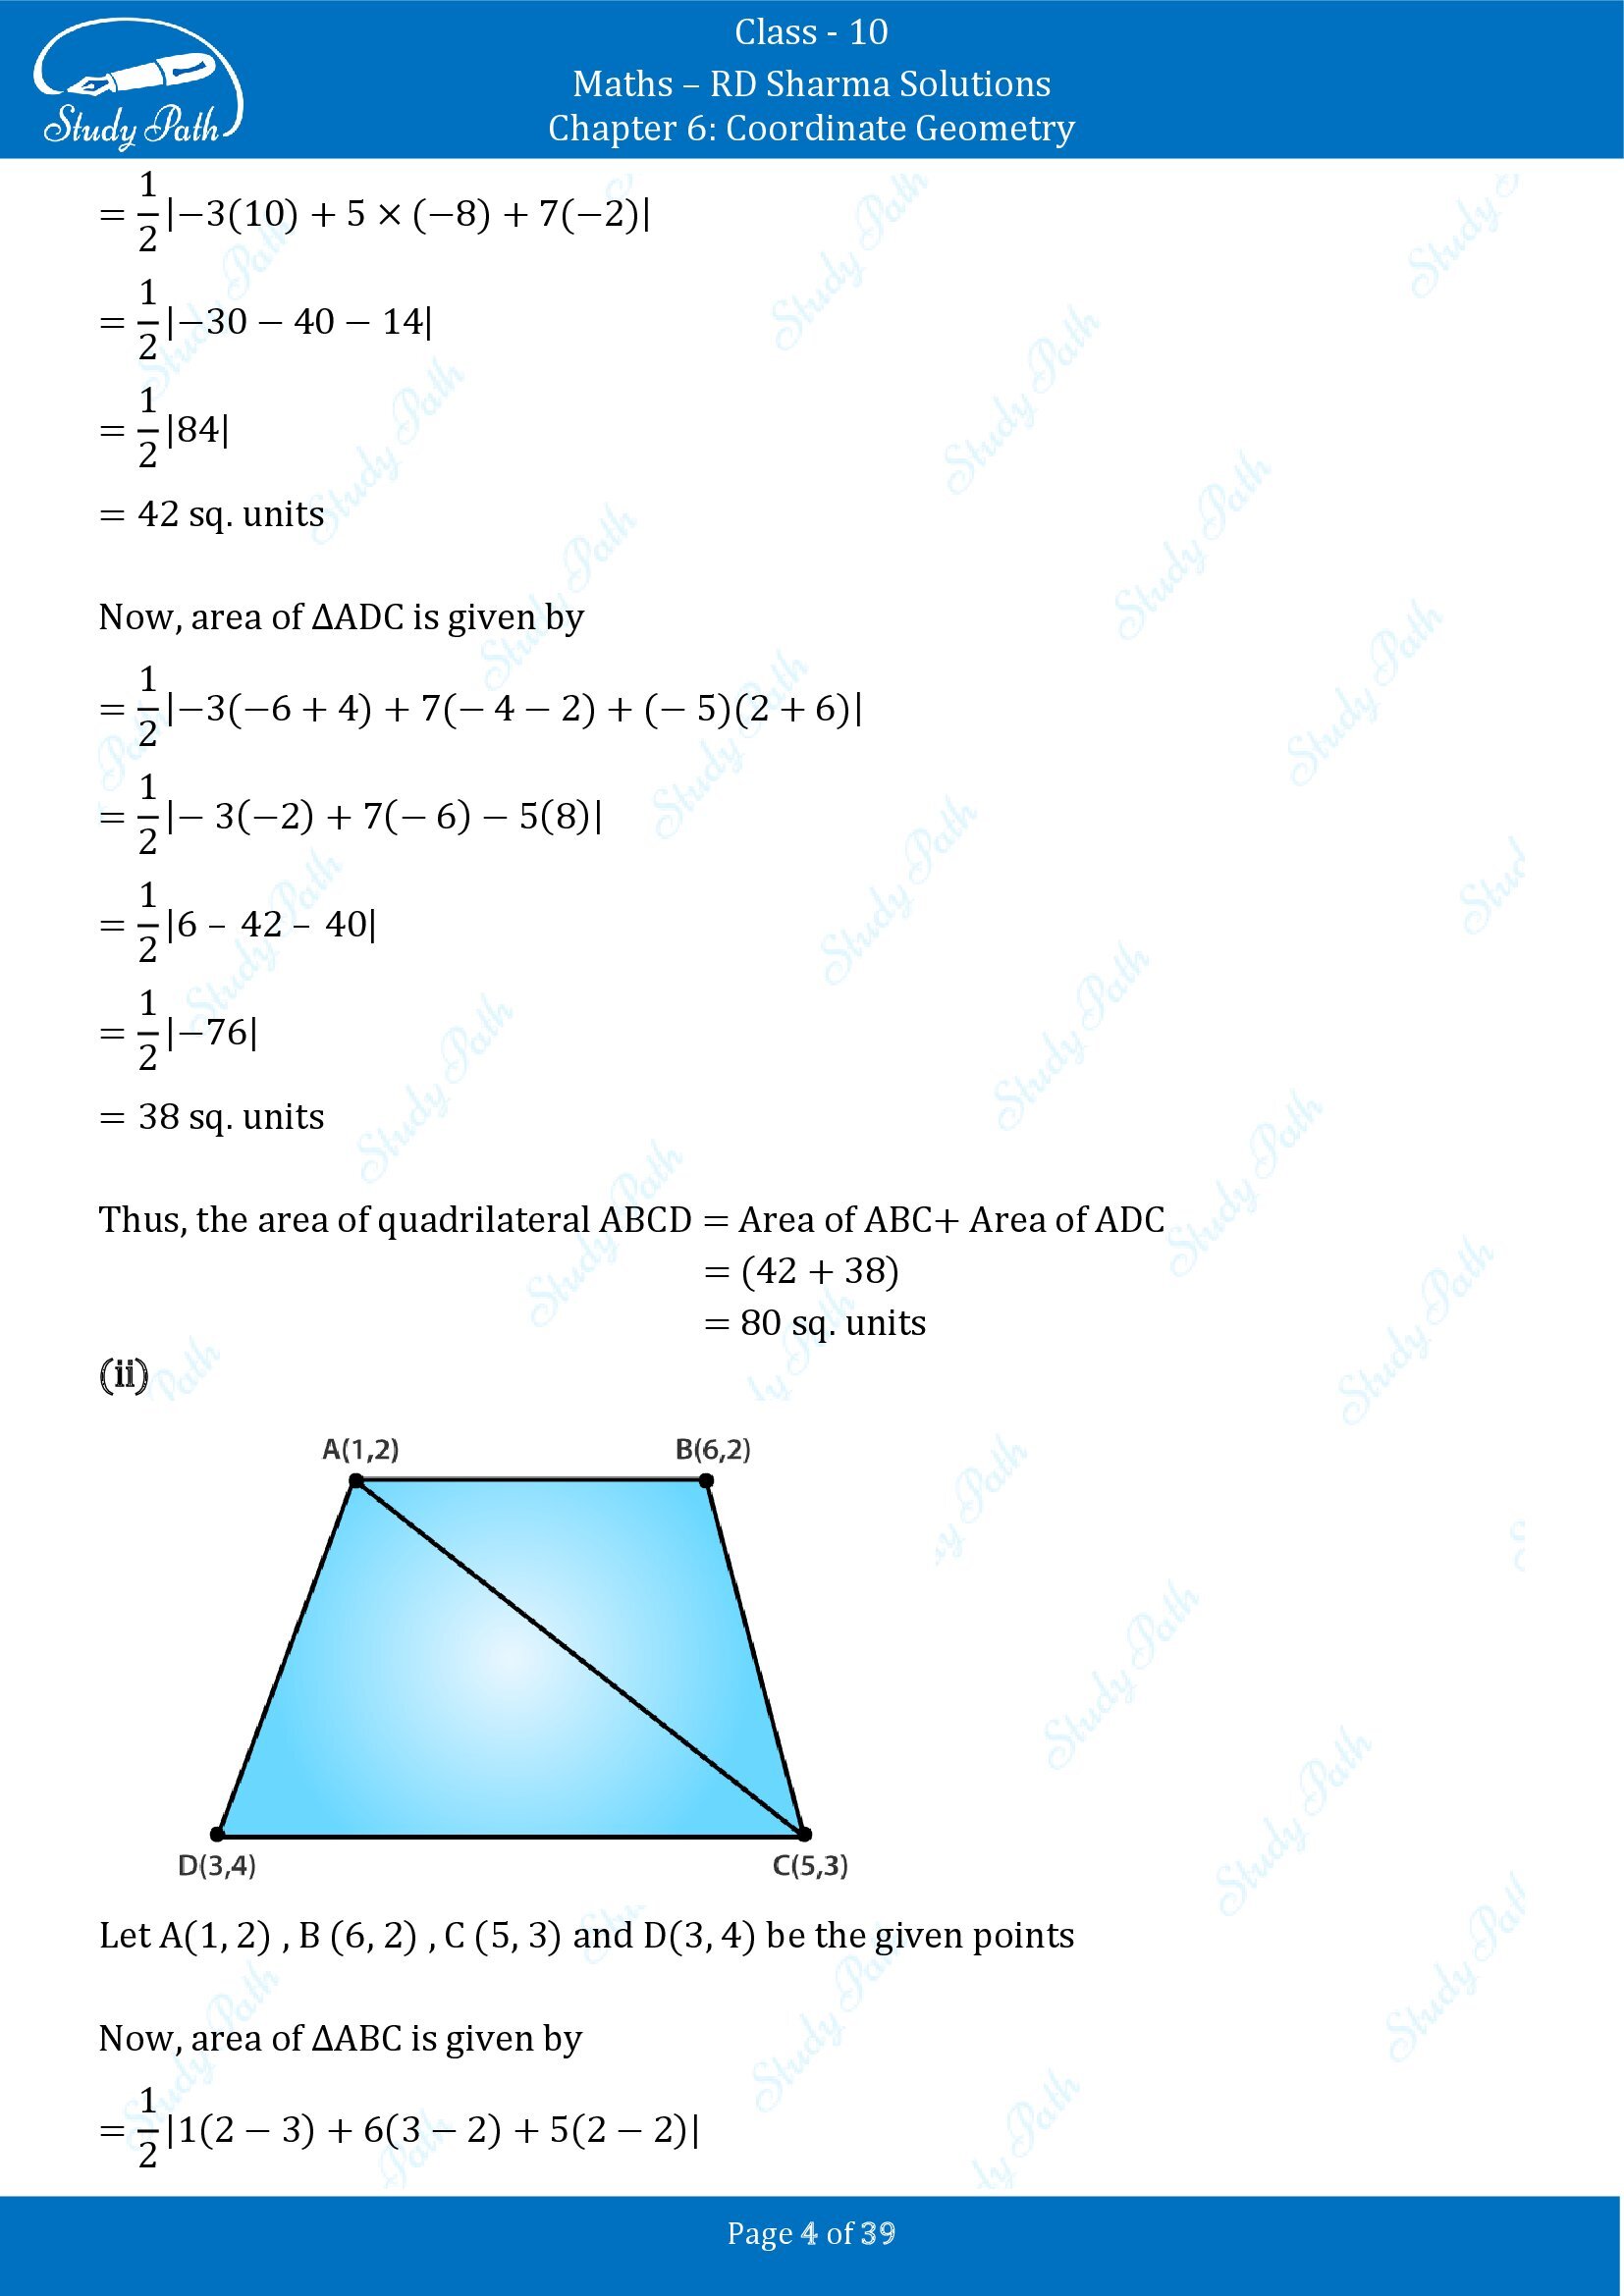 RD Sharma Solutions Class 10 Chapter 6 Coordinate Geometry Exercise 6.5 0004